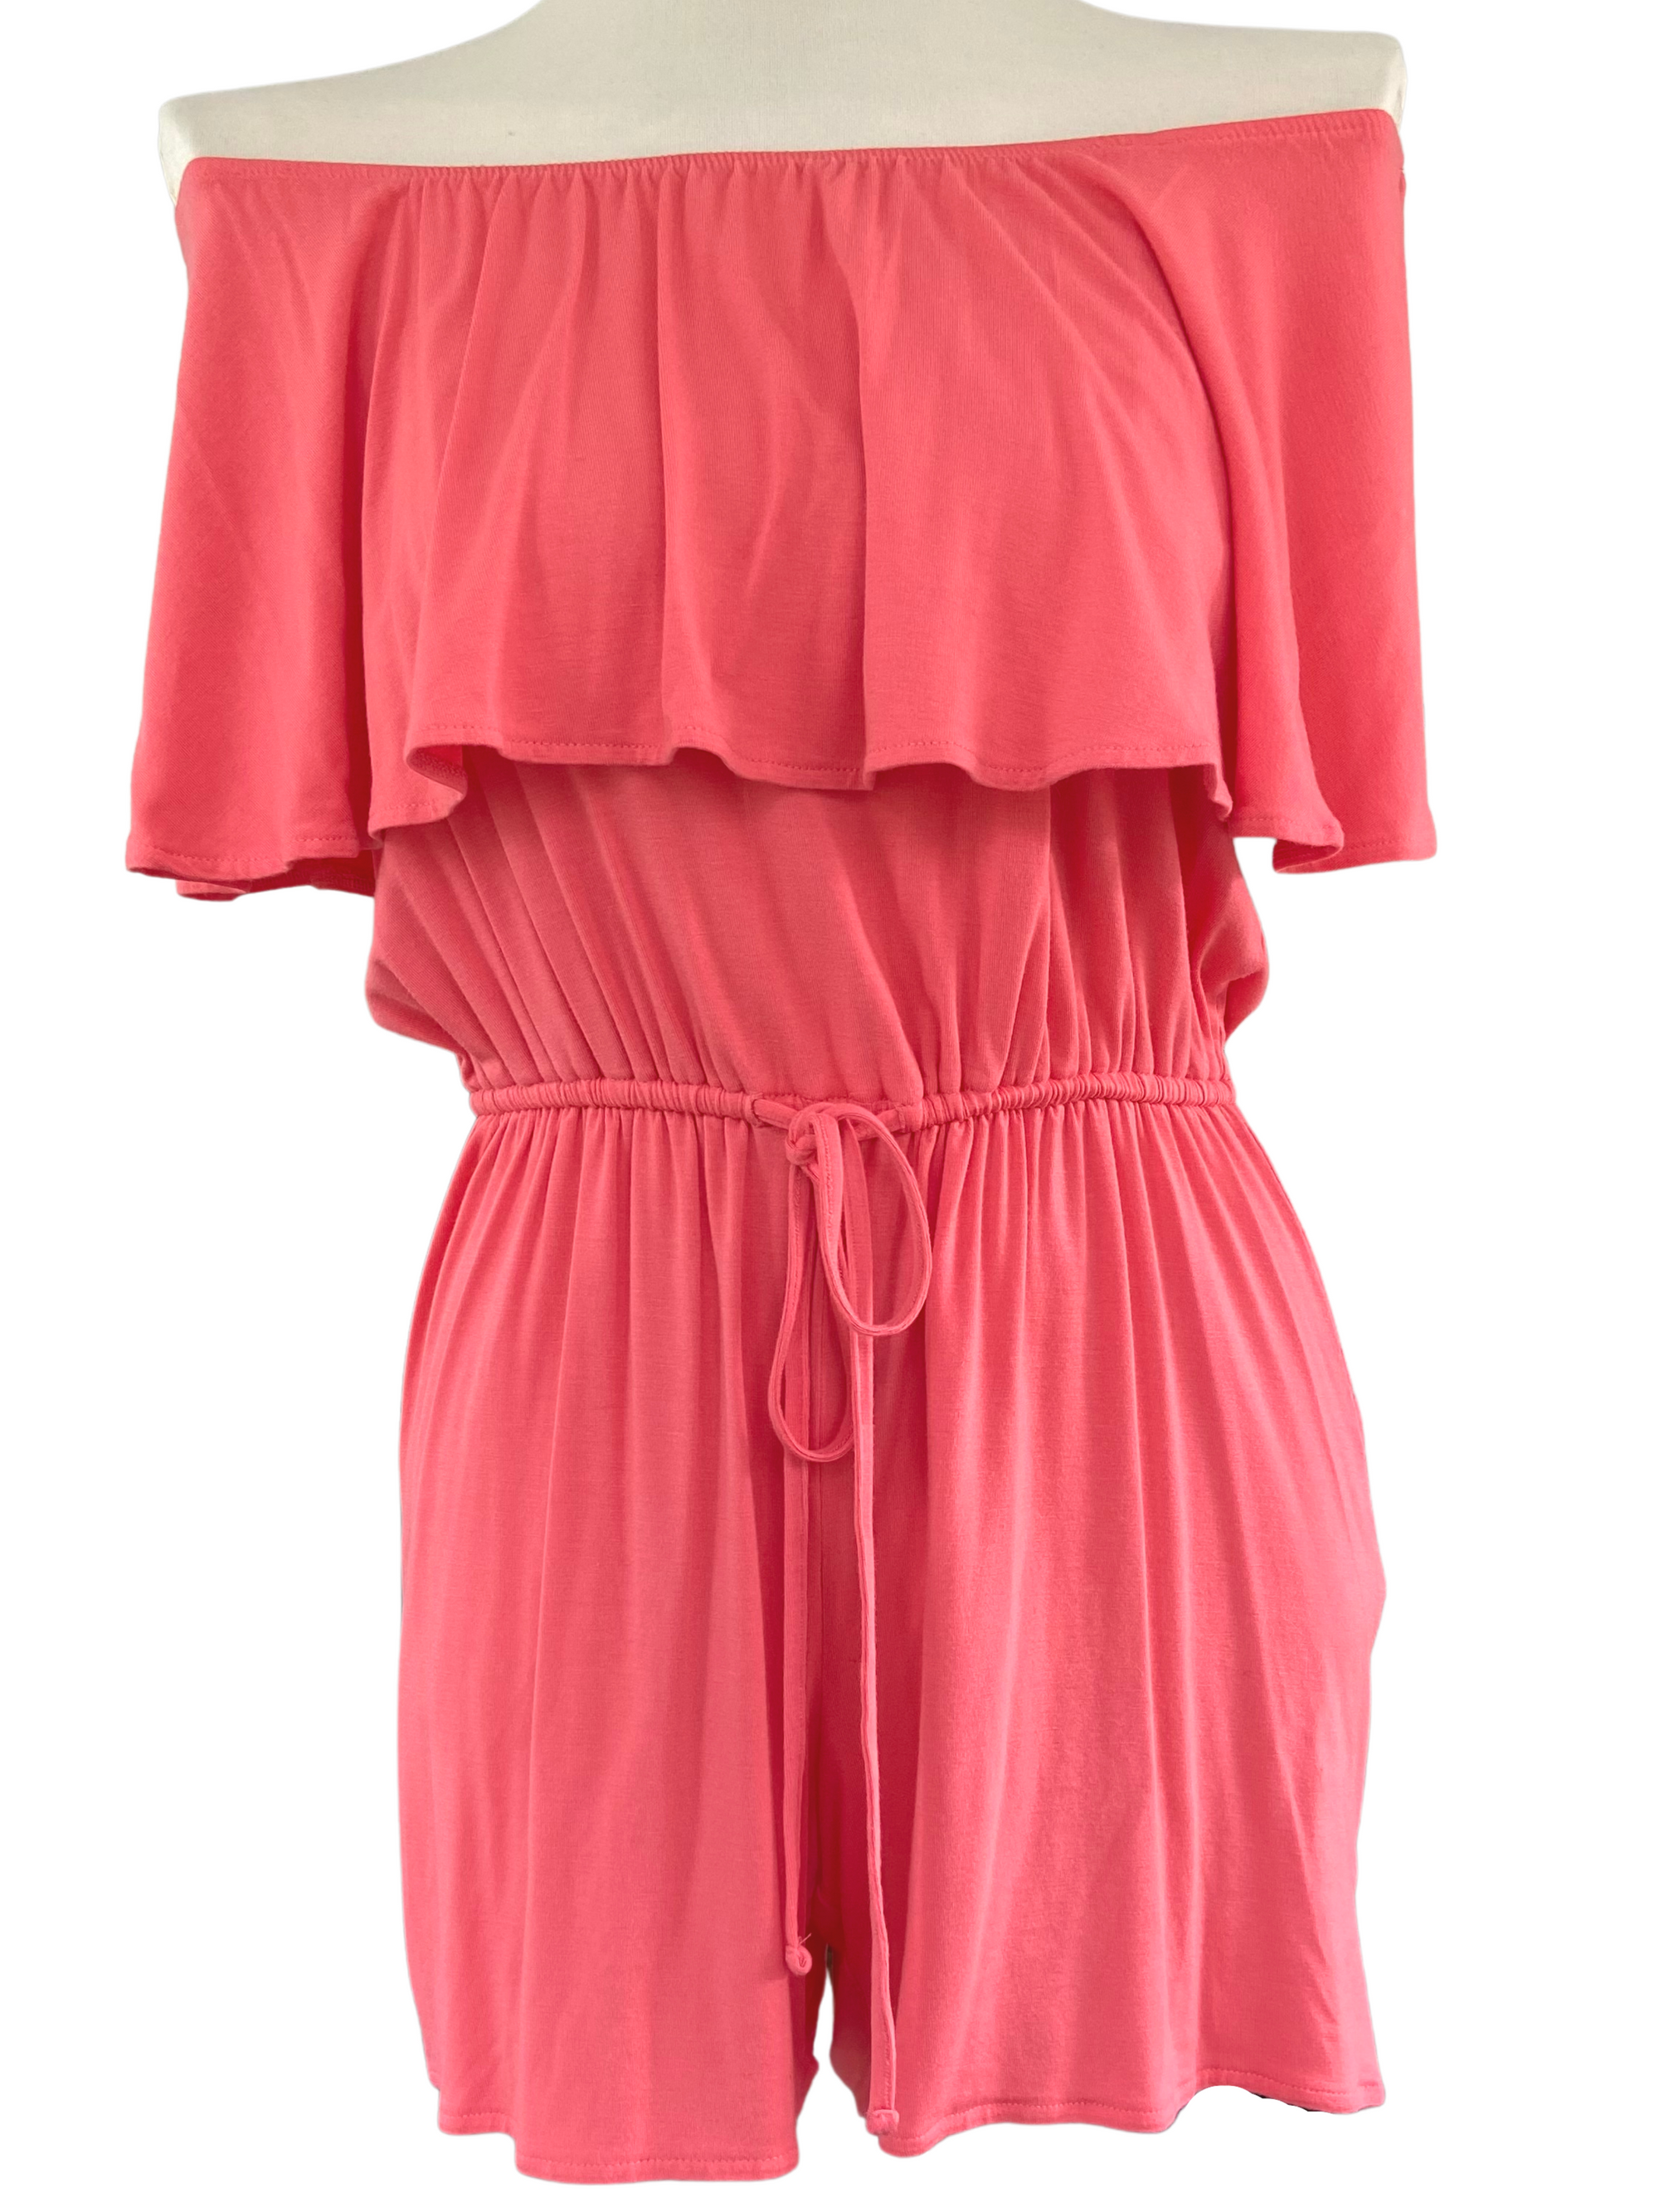 Warm Spring OLD NAVY coral ruffle romper